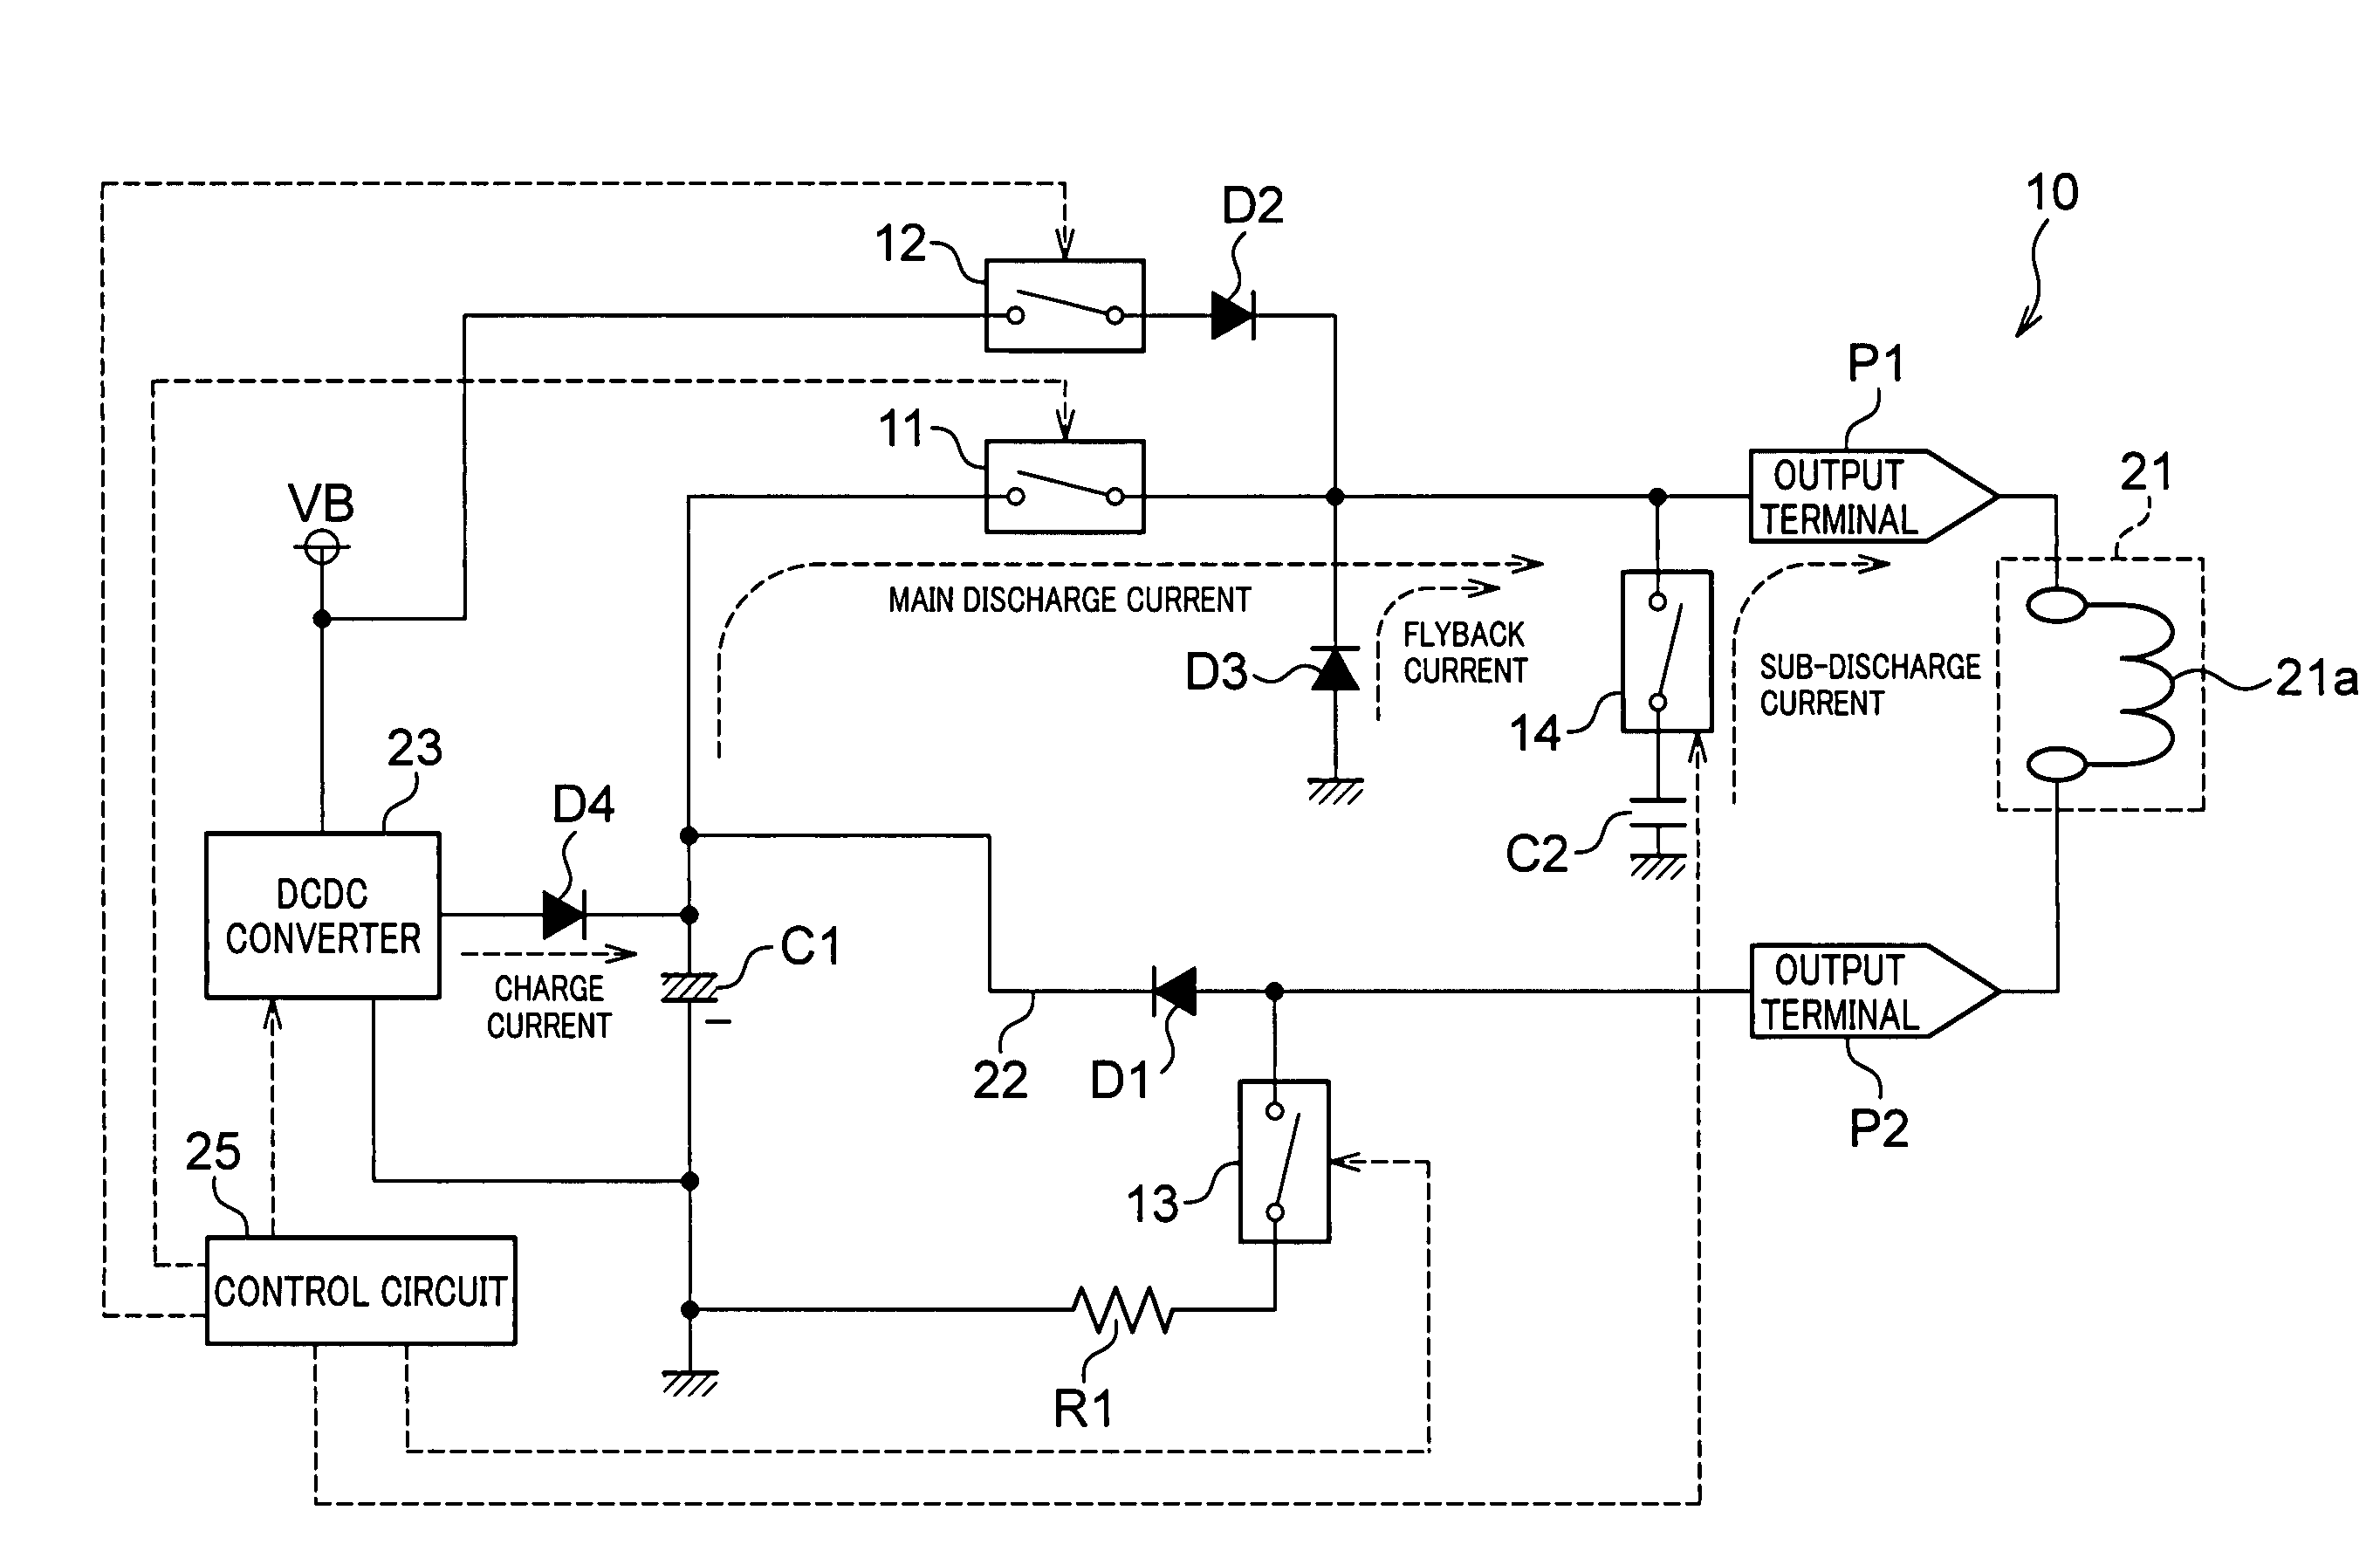 Drive of an electromagnetic valve with a coil by supplying high voltage from a discharging capacitor to the coil